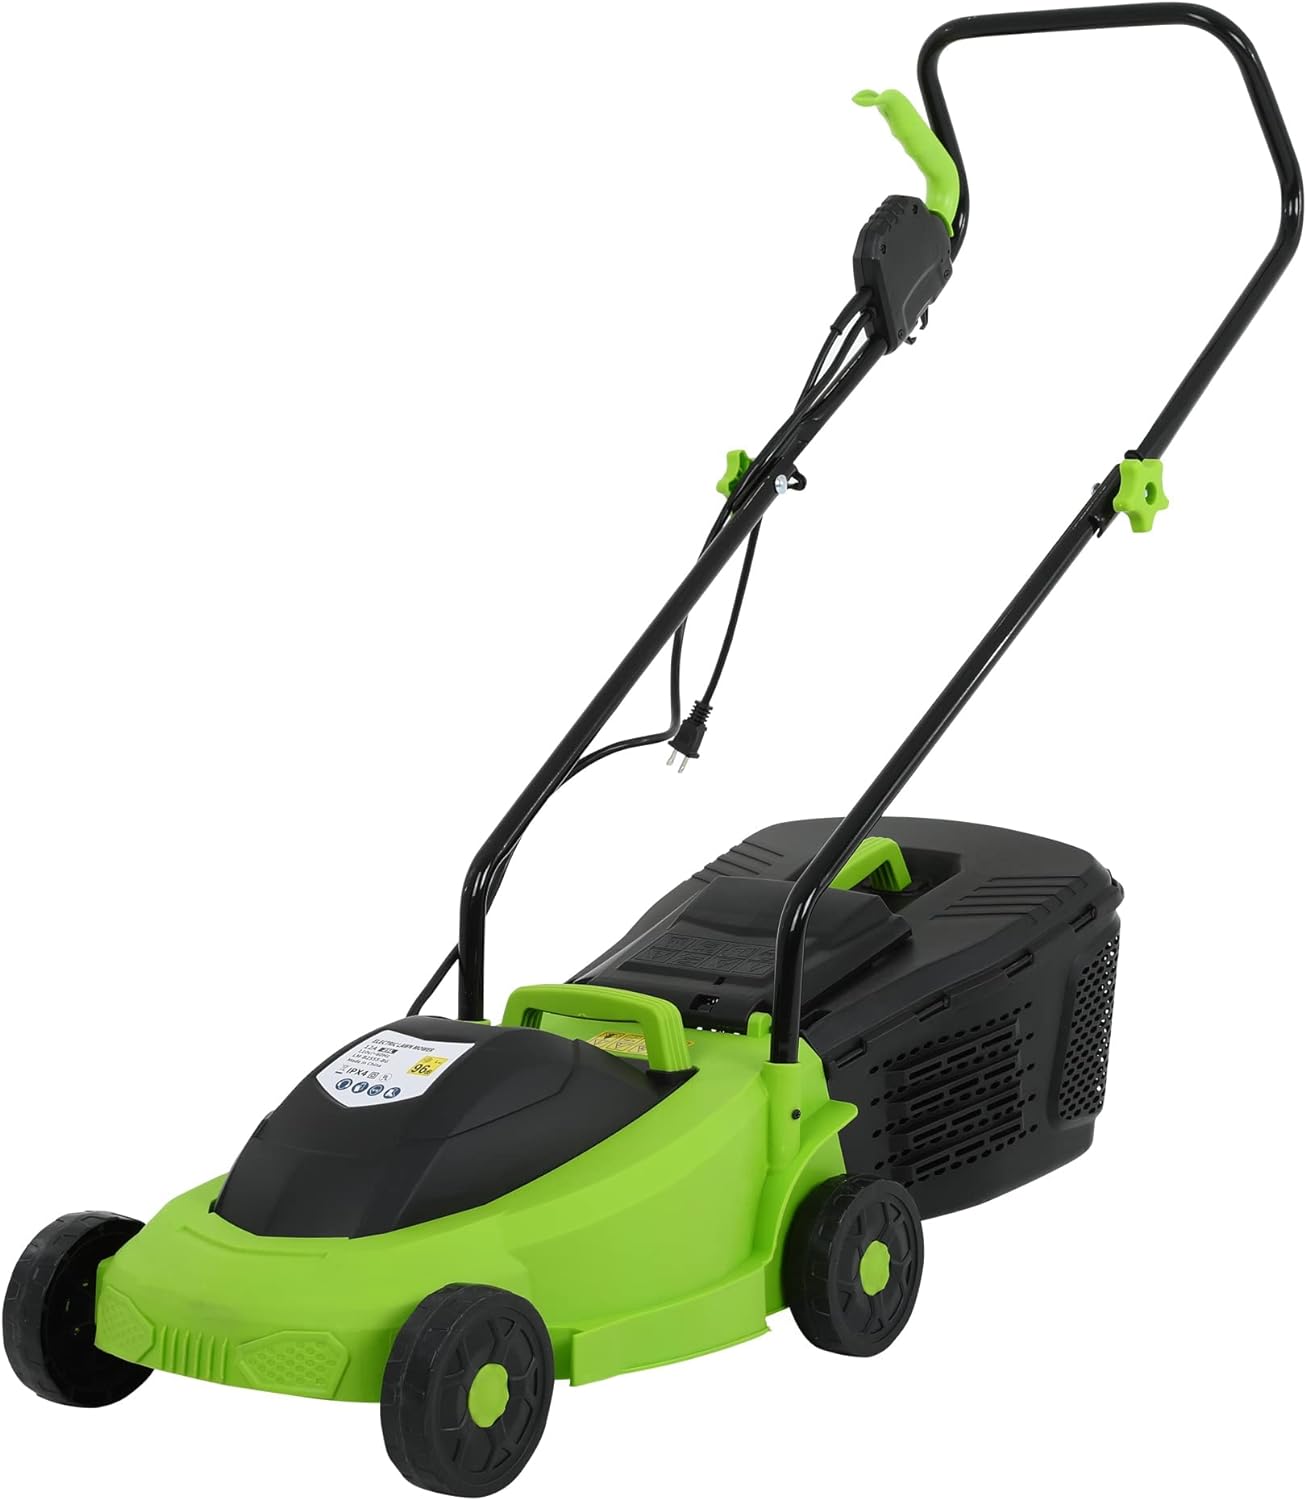 I was pleasantly surprised by this lawn mower' power. We had a typical sized backyard that had a huge forest of different types of grass, goat heads (idk the plant name), up to two and a half feet tall in many places huge weeds with stalks about half an inch to an inch thick in some places.We set it to the tallest setting, and were able to mow down the whole yard within a few hours. Keep in mind, this mower is narrow, but that I think helped with getting the tougher patches, keep in mind we als